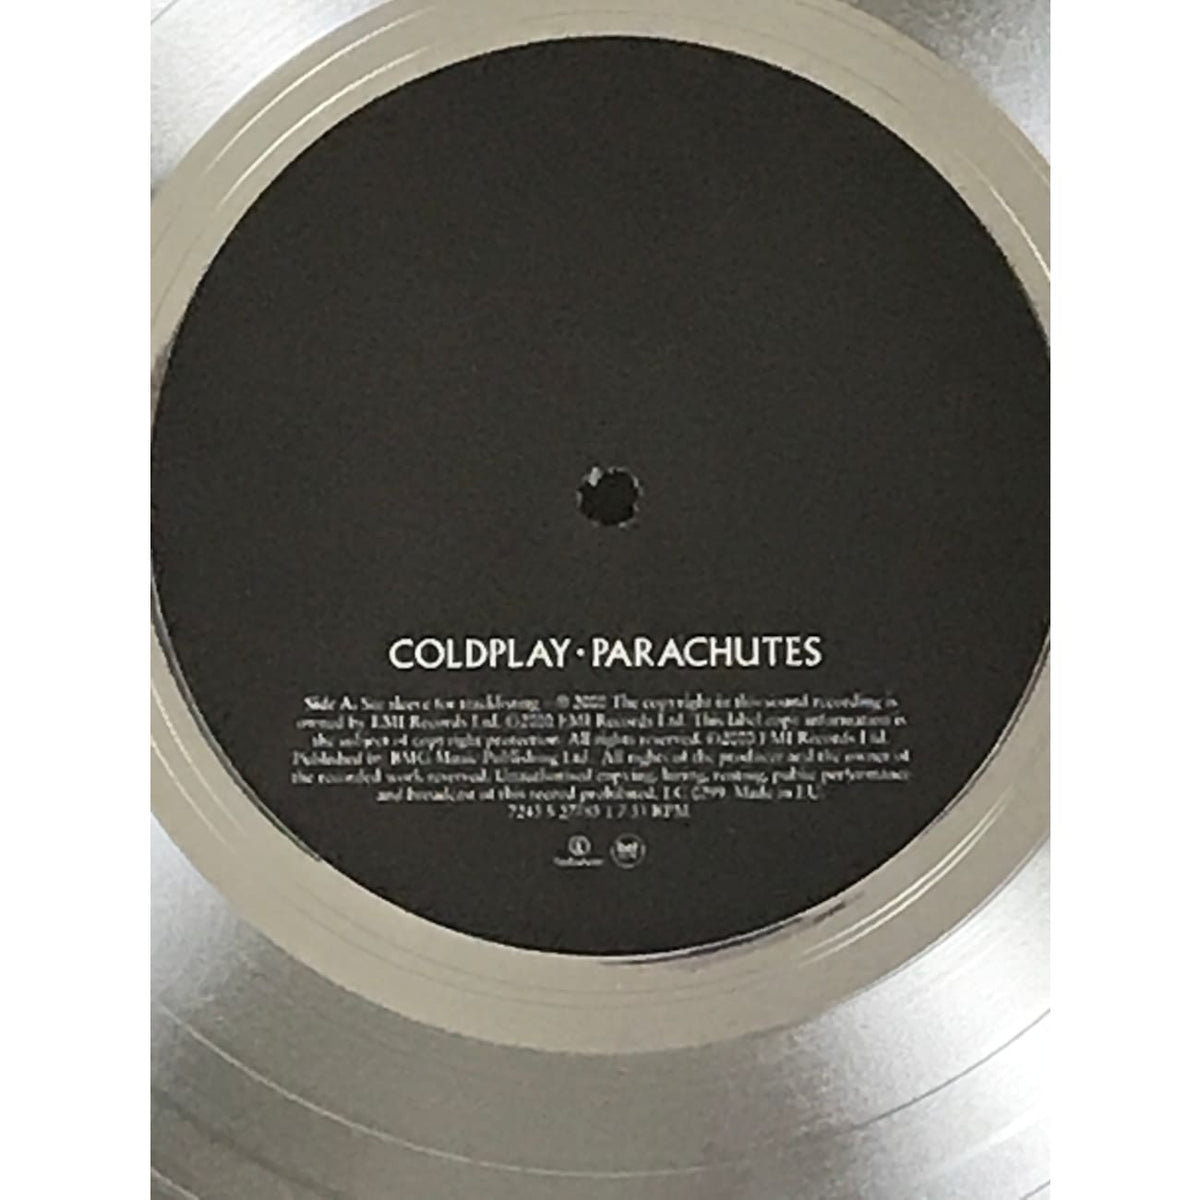 Coldplay Vinyl Records for sale